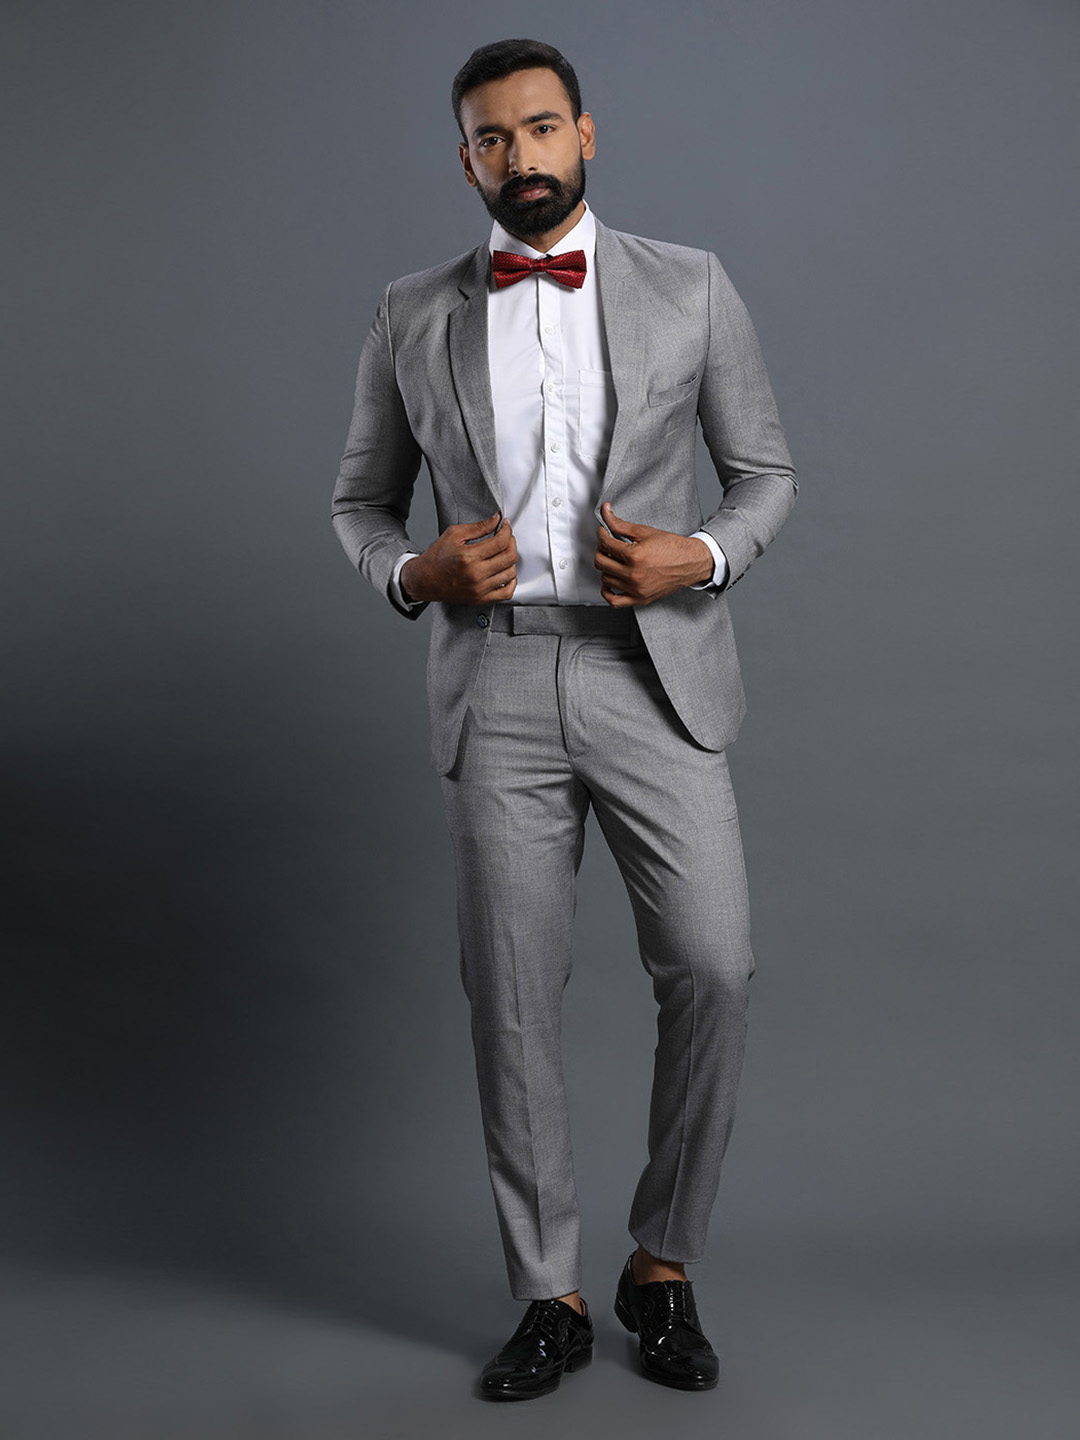 Rent/Buy Light Grey 2 Piece Suit | Home Trial | Free Delivery | CandidKnots I Bought A New Suit For